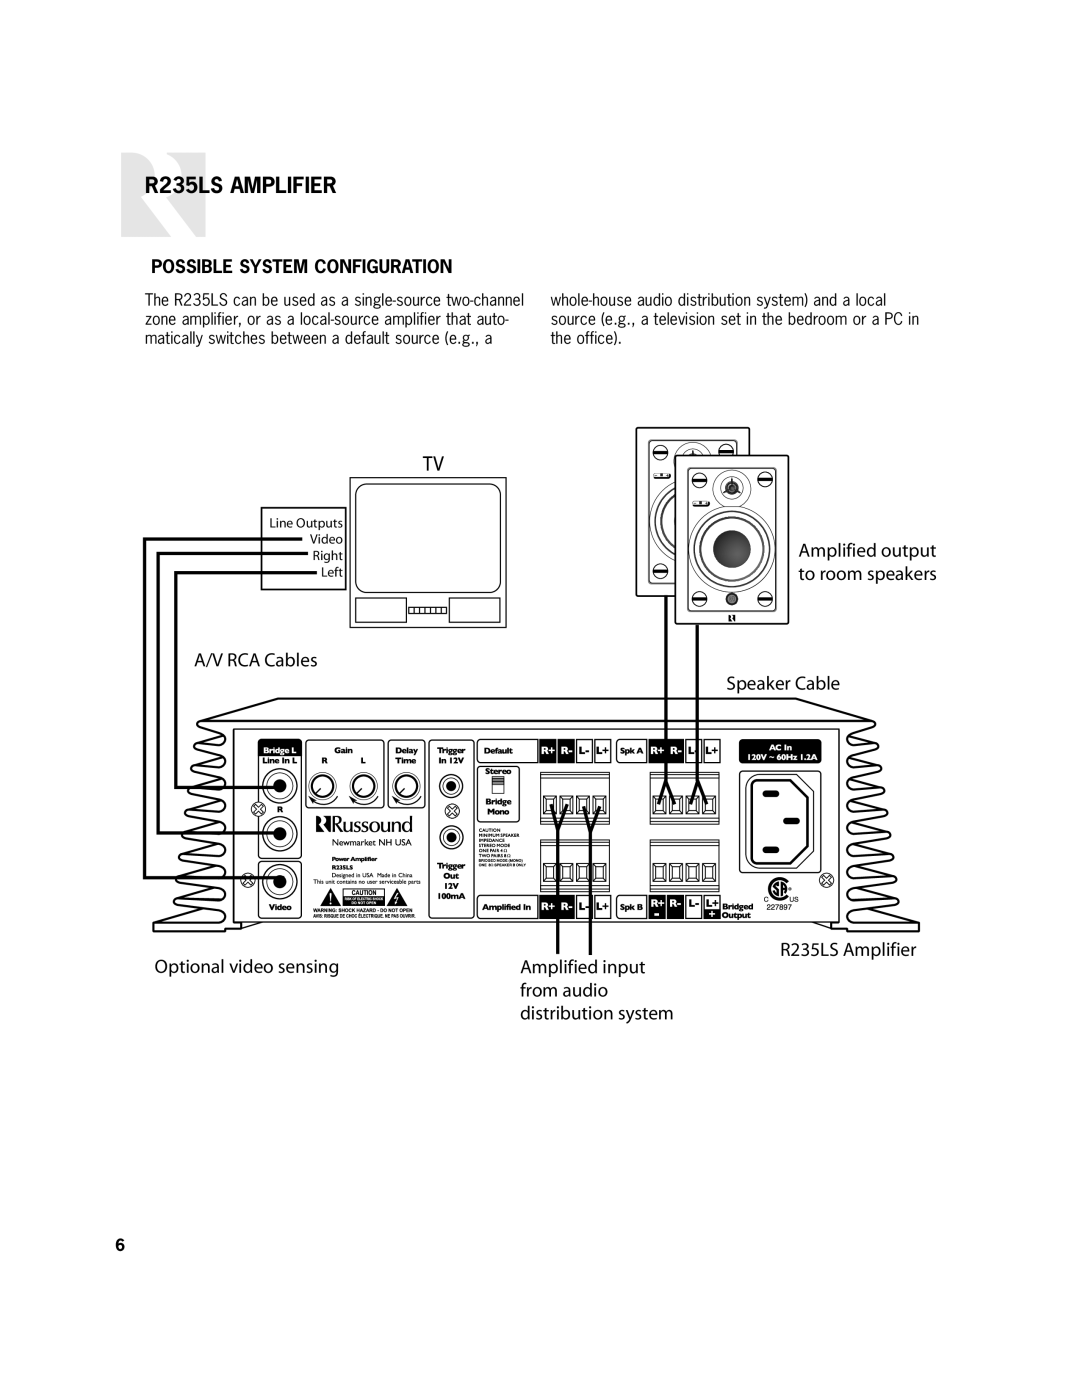 Russound R-Series Possible System Configuration, to room speakers, R235LS Amplifier, distribution system, R235LS AMPLIFIER 